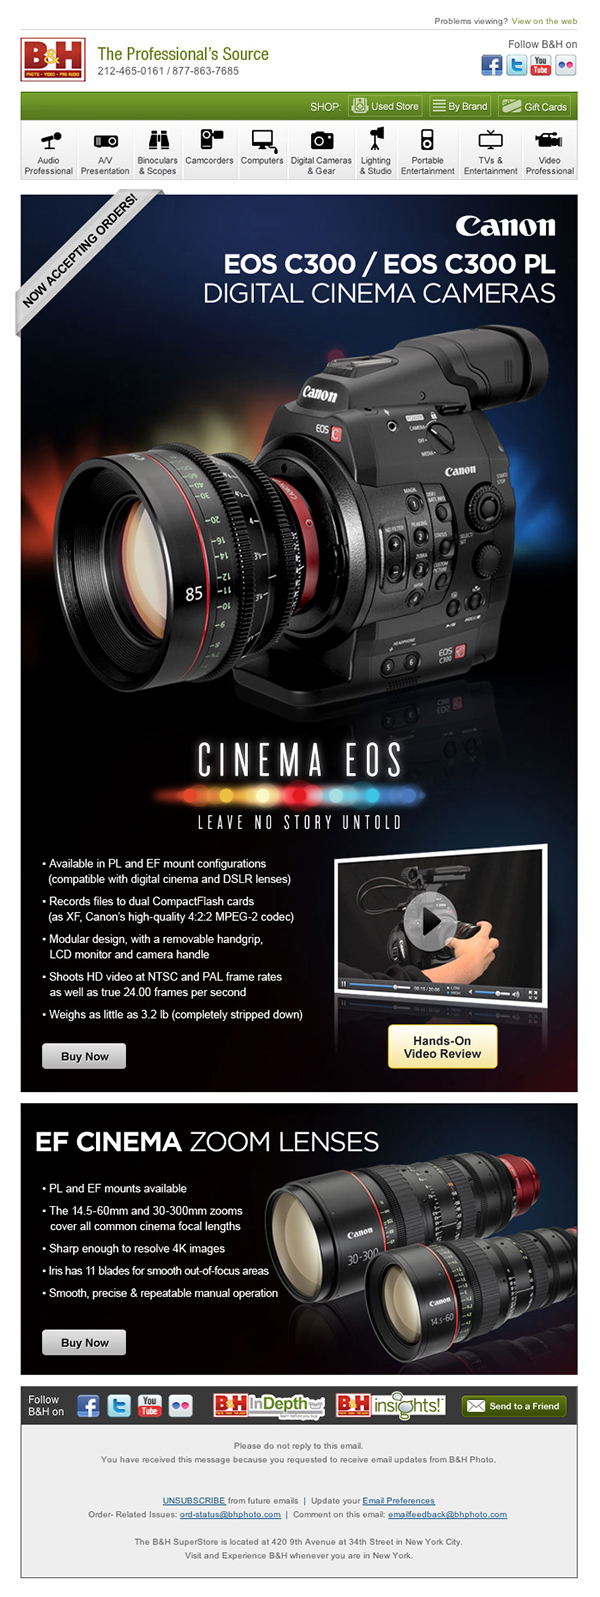 Email Design email marketing promotional email product launch announcements Canon EOS C300